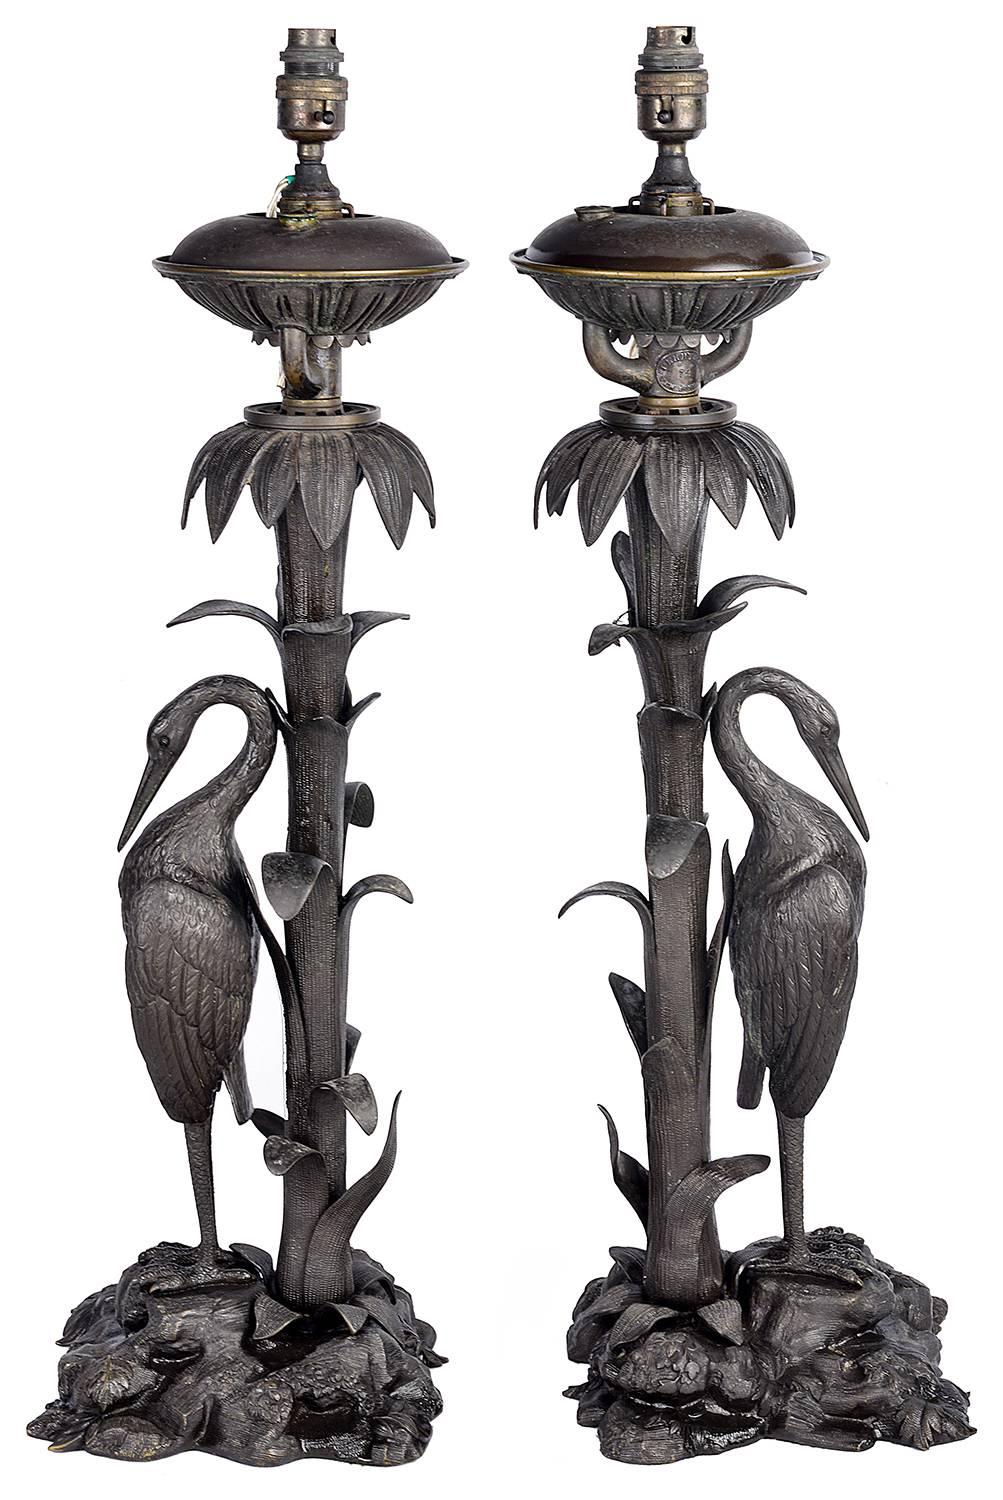 A very decorative pair of 10th century bronze lamps, depicting Cranes under Palm trees and standing on a rocky outcrop. 
Stamped with the makers name; Perry, New Bond Street. London.